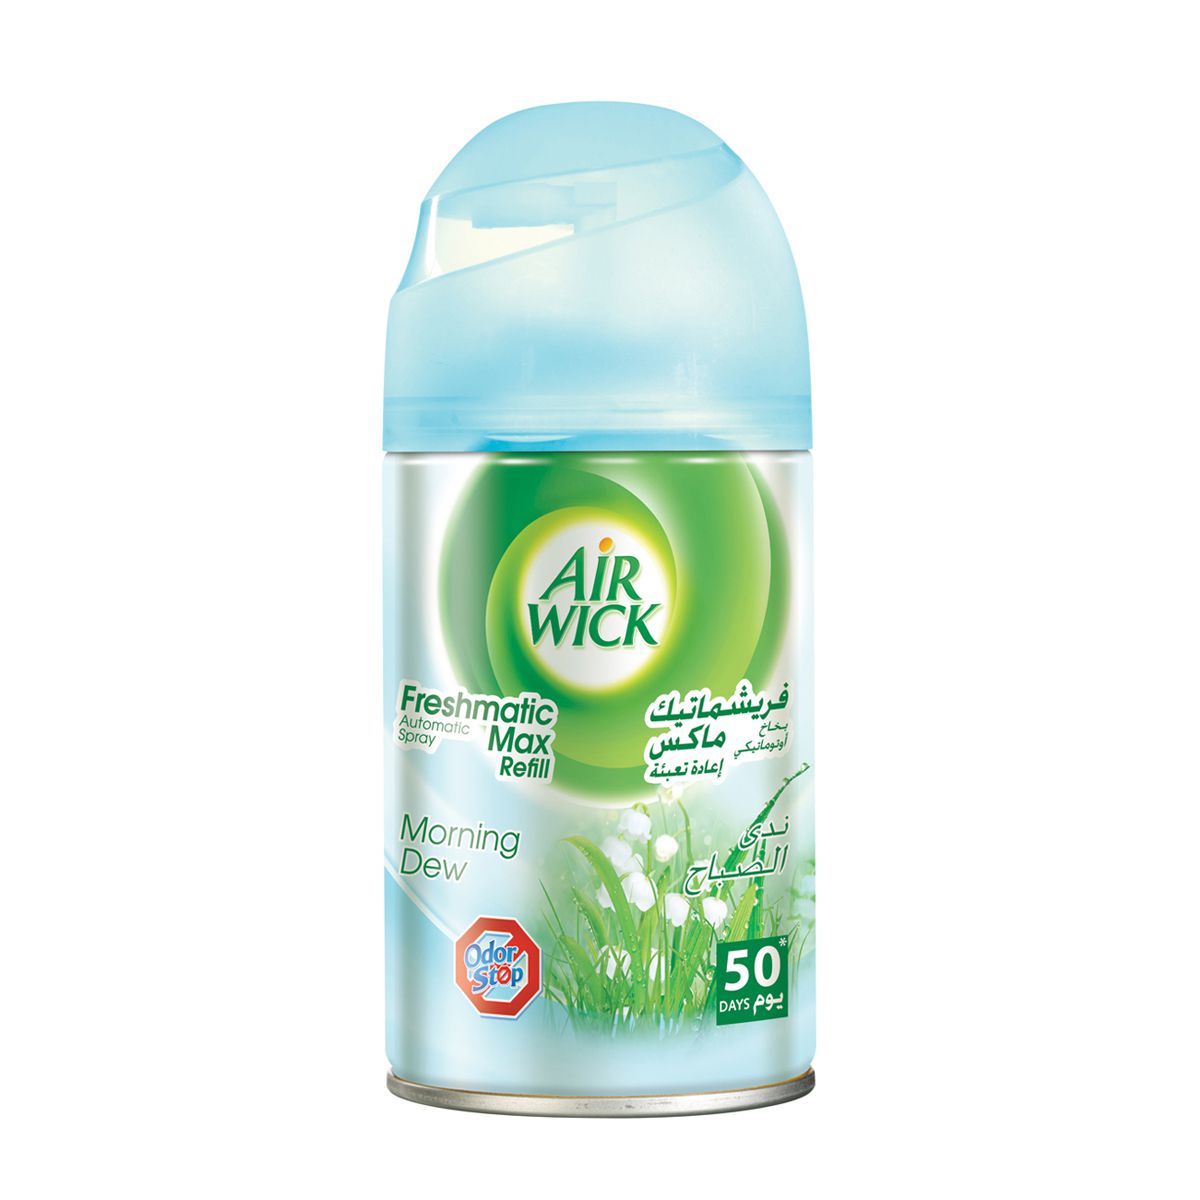 Air Wick's Automatic Spray in Tropical Island Breeze